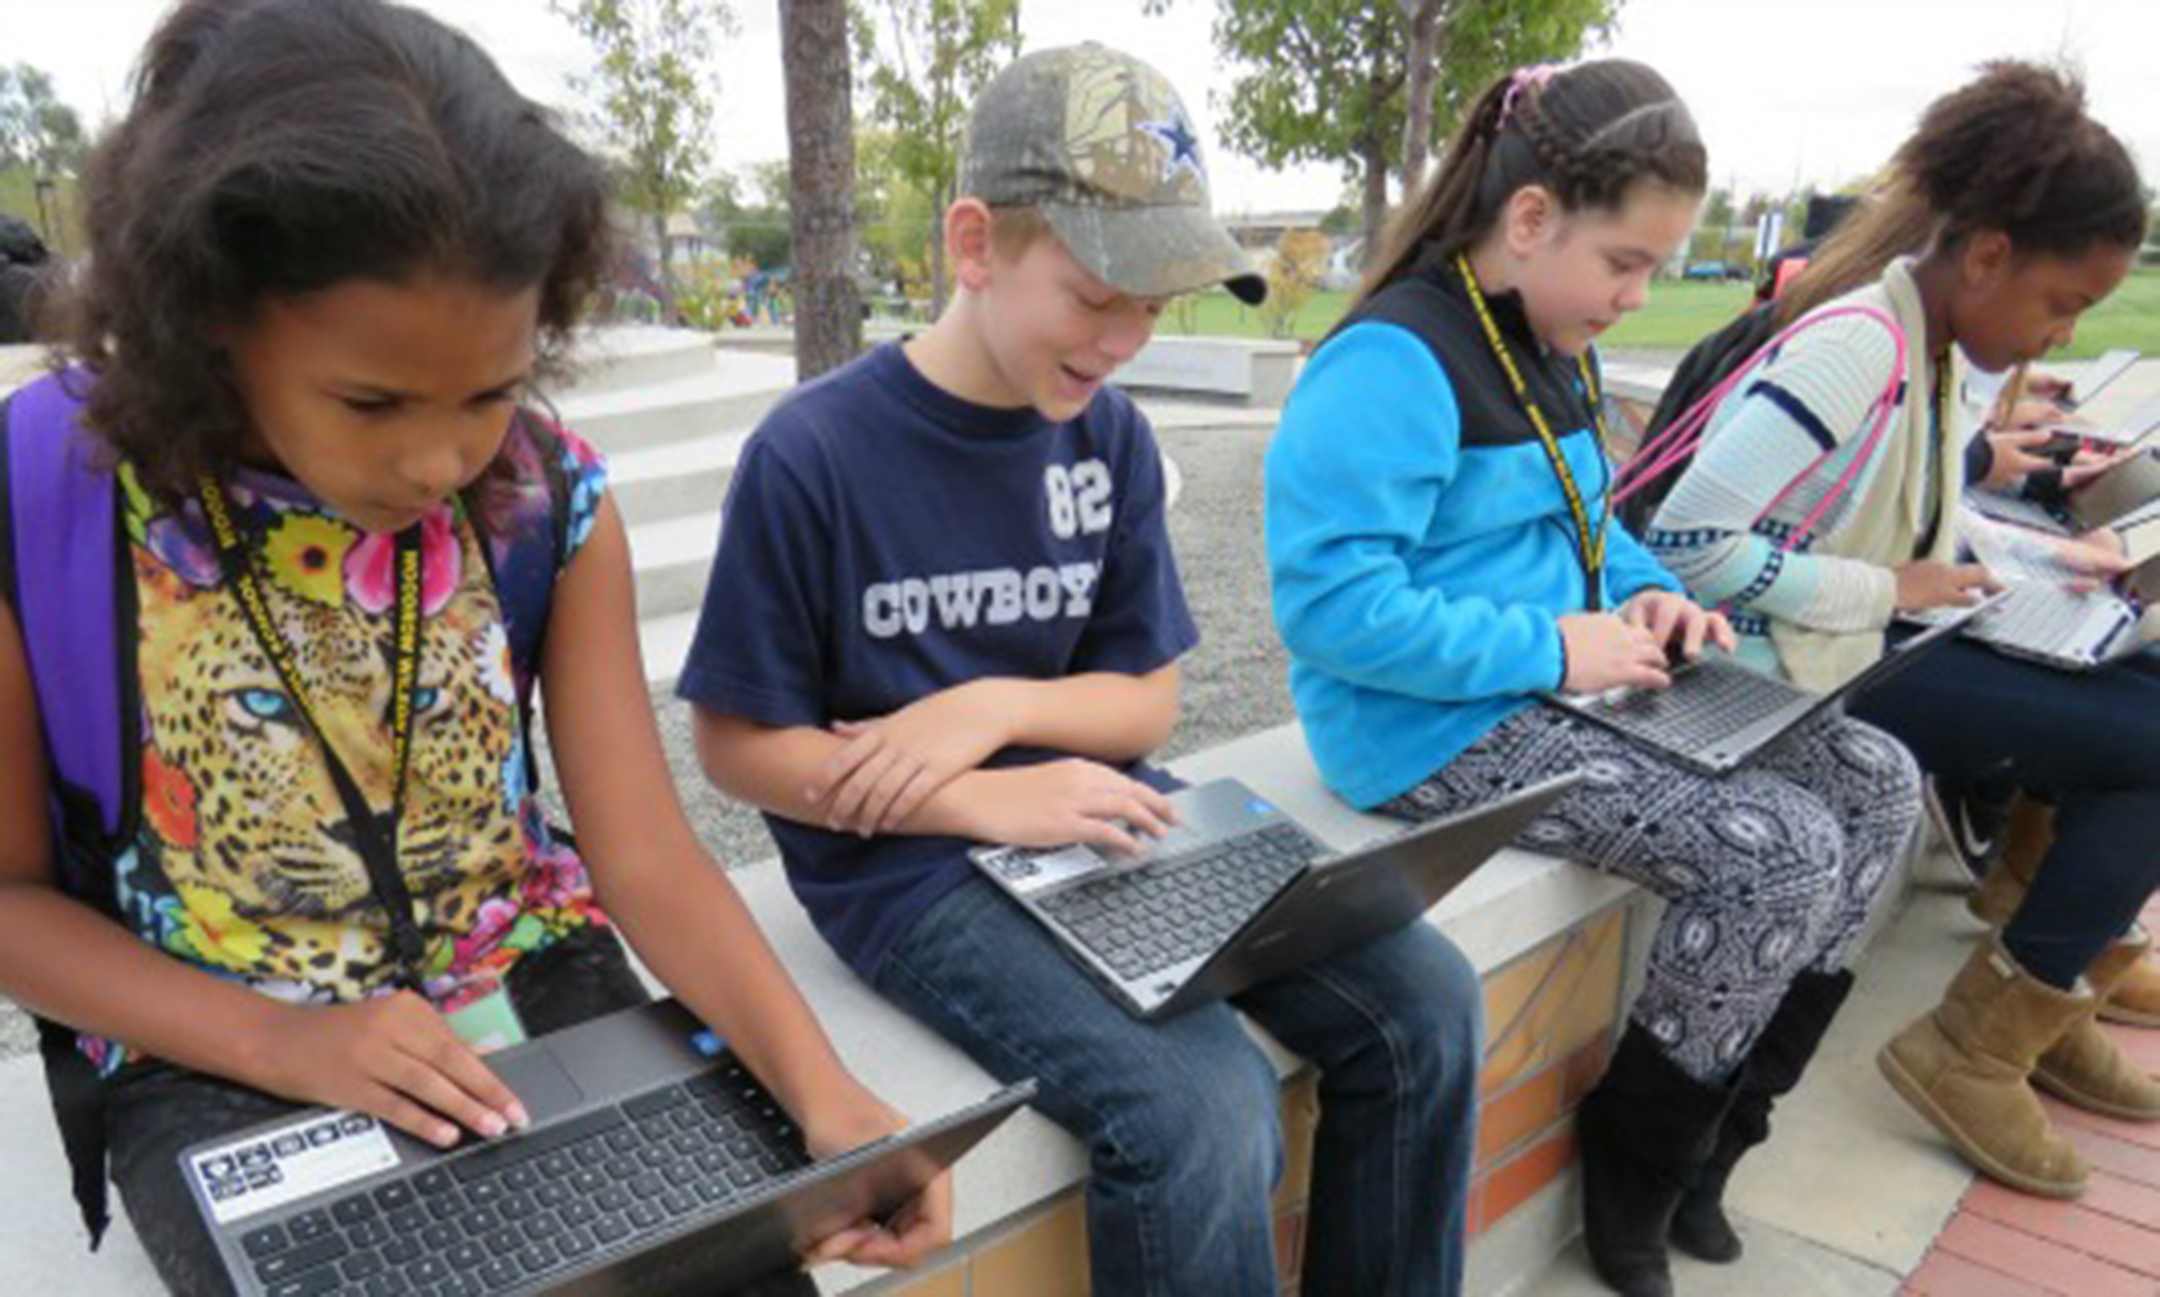 Four students, three girls and one boy, work on laptops outside